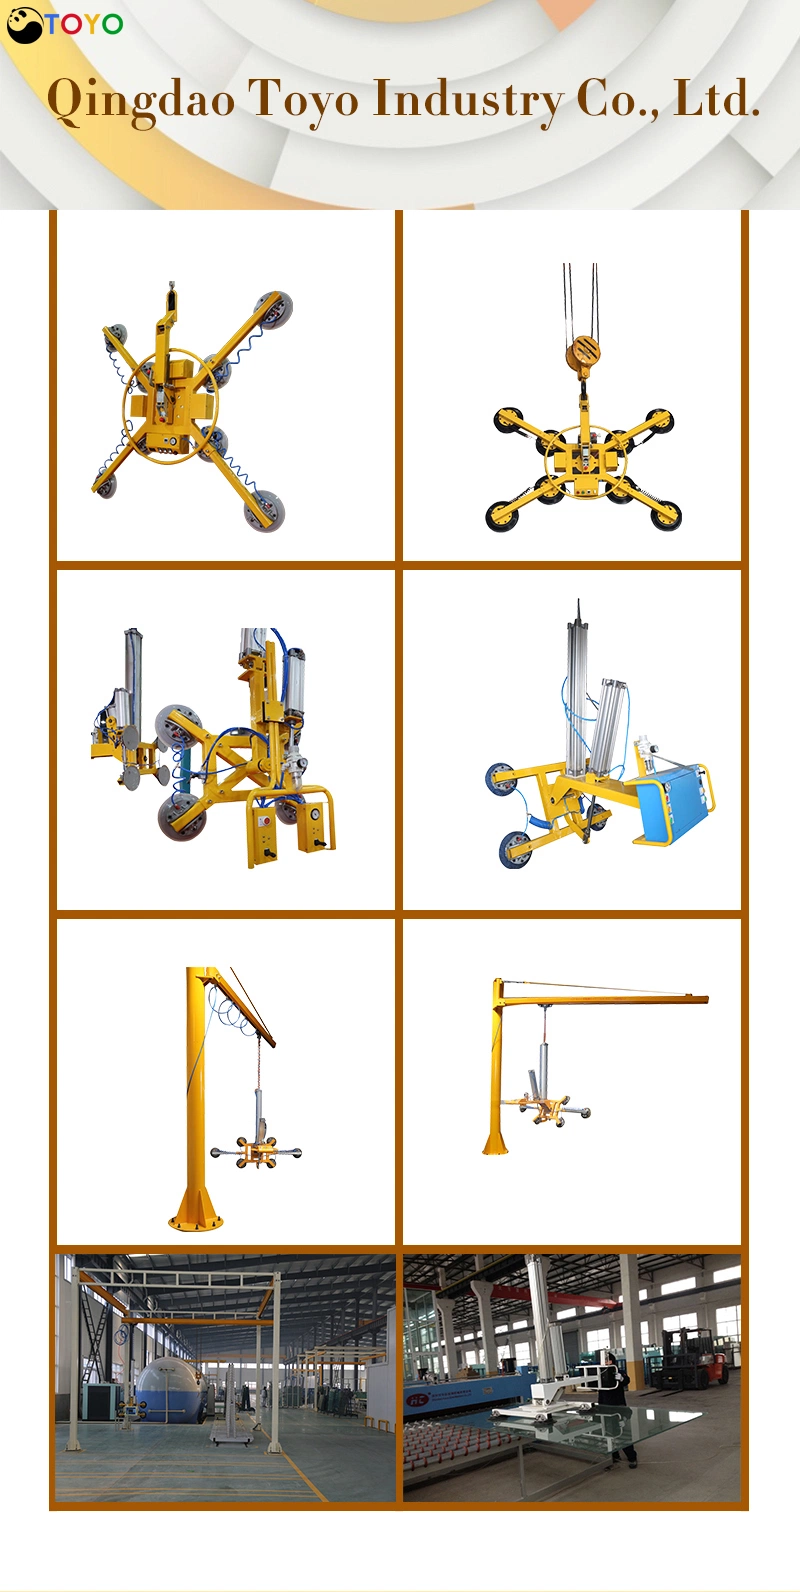 Glass Production Line Used Light Vacuum Glass Lifter System Manipulator Cantilever